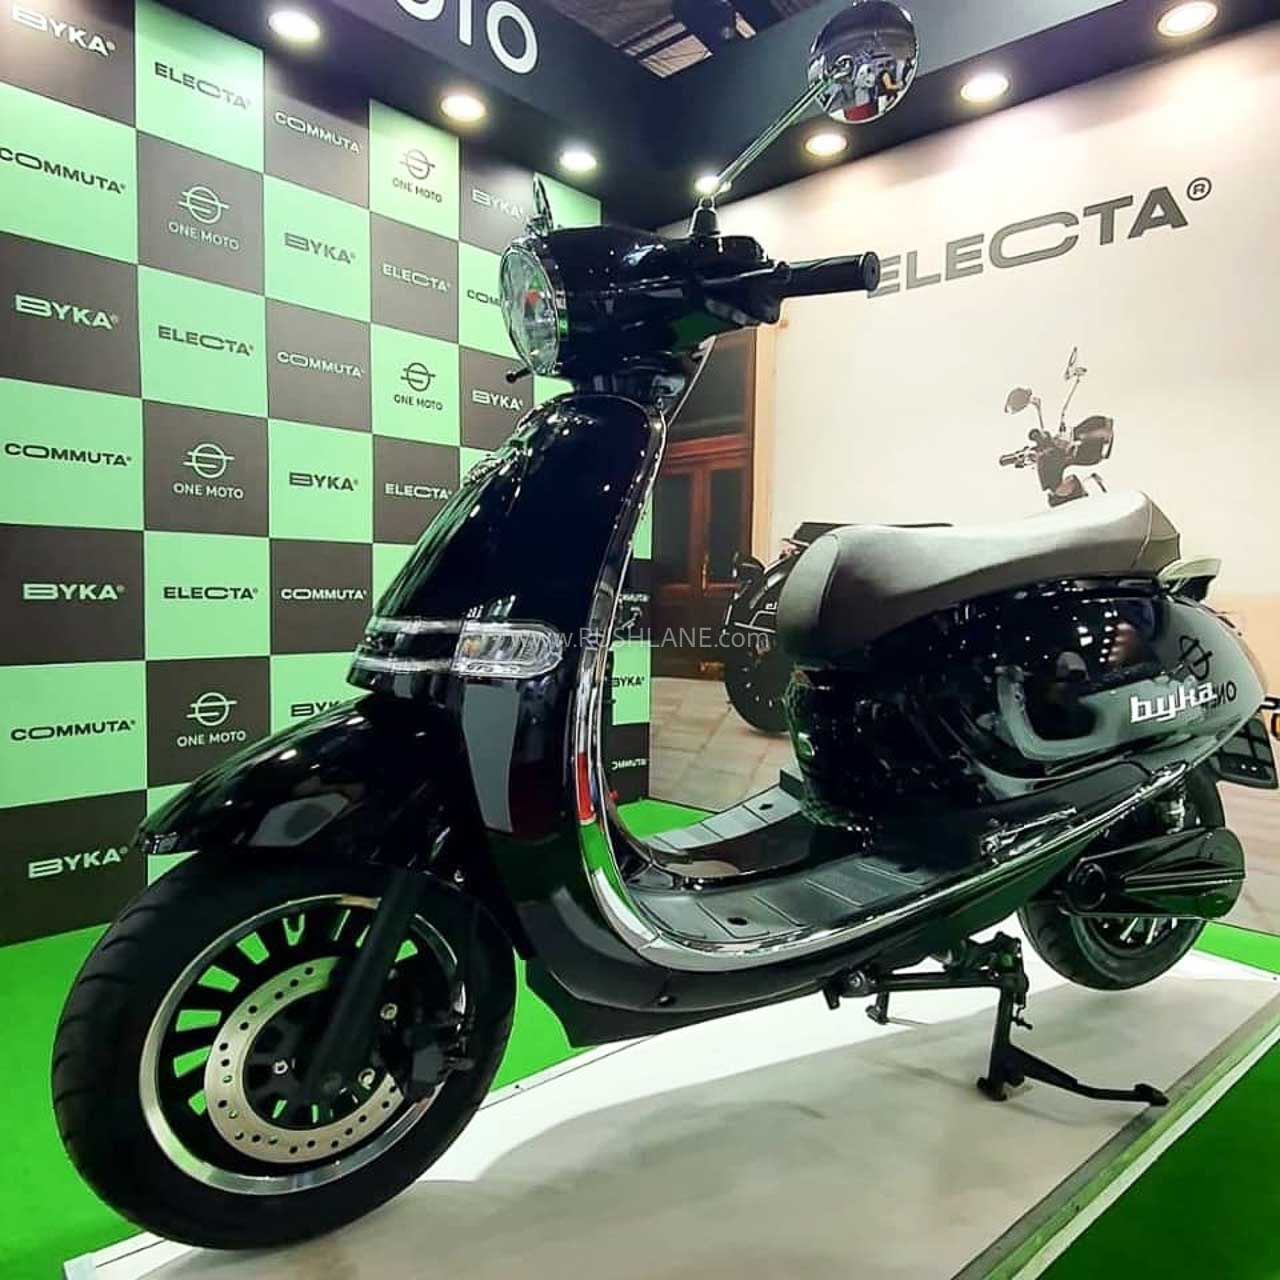 One Moto Electa displayed in front of green wall